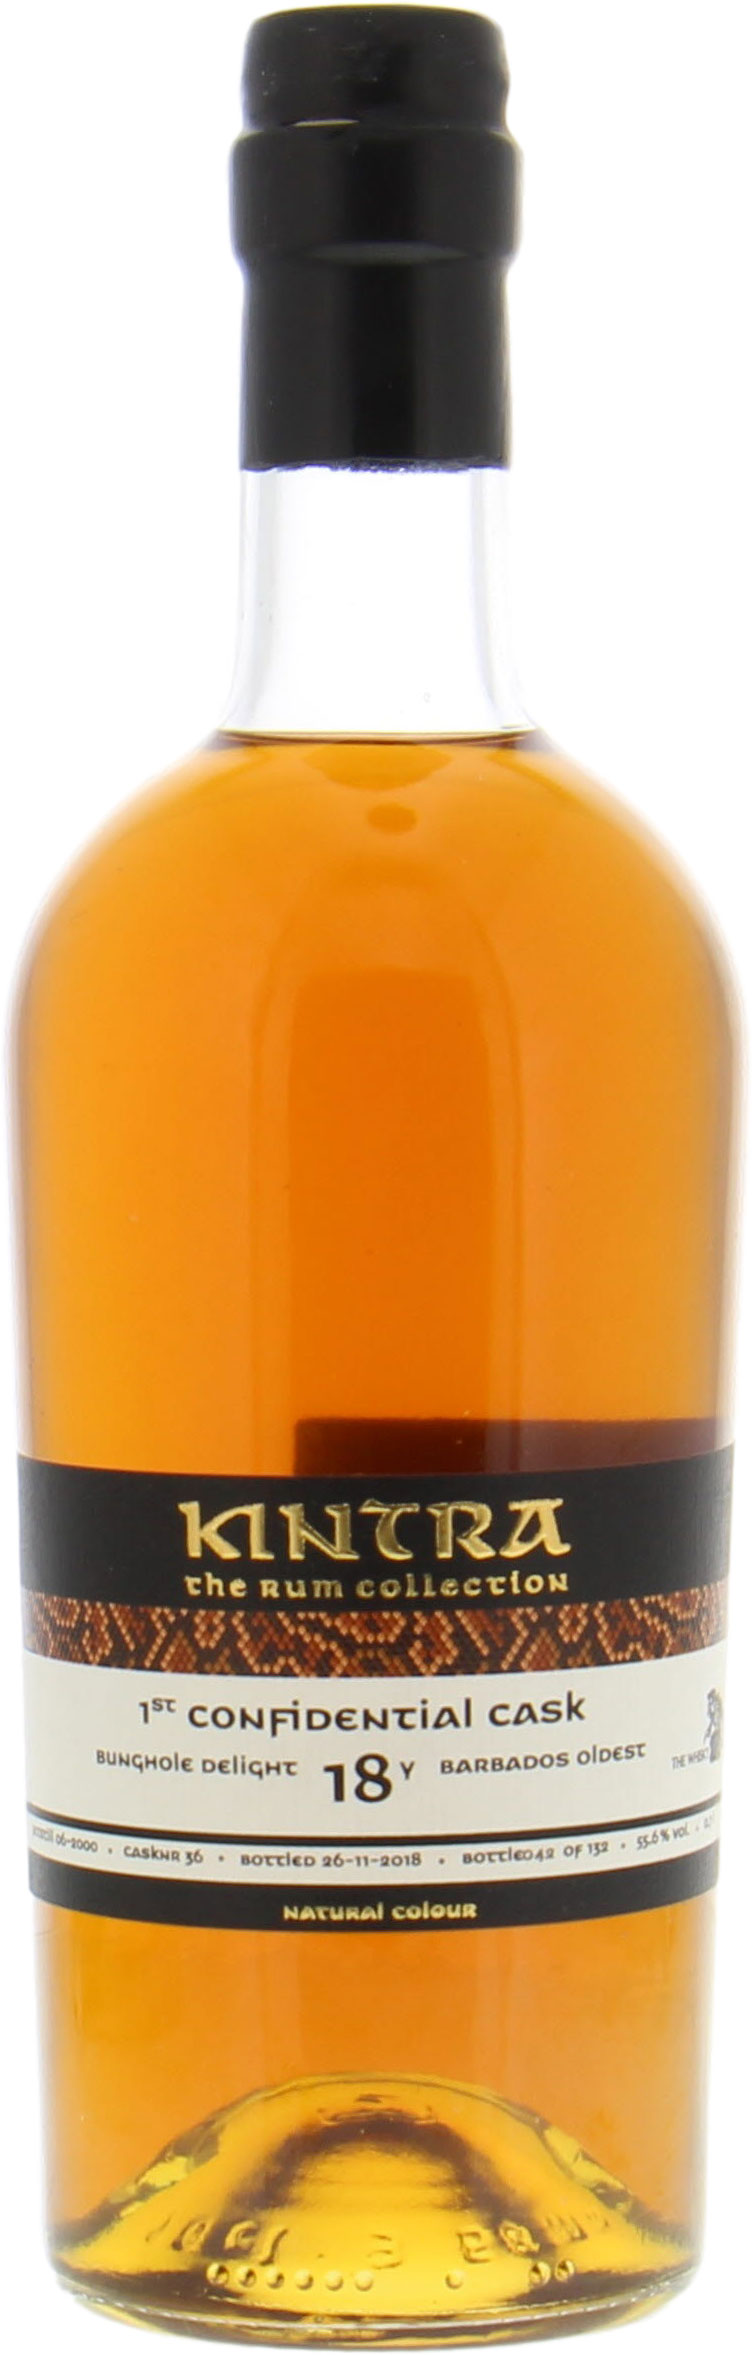 MG Barbados Oldest - 18 Years Old Bunghole Delight Kintra Confidential Cask 36 55.6% 2000